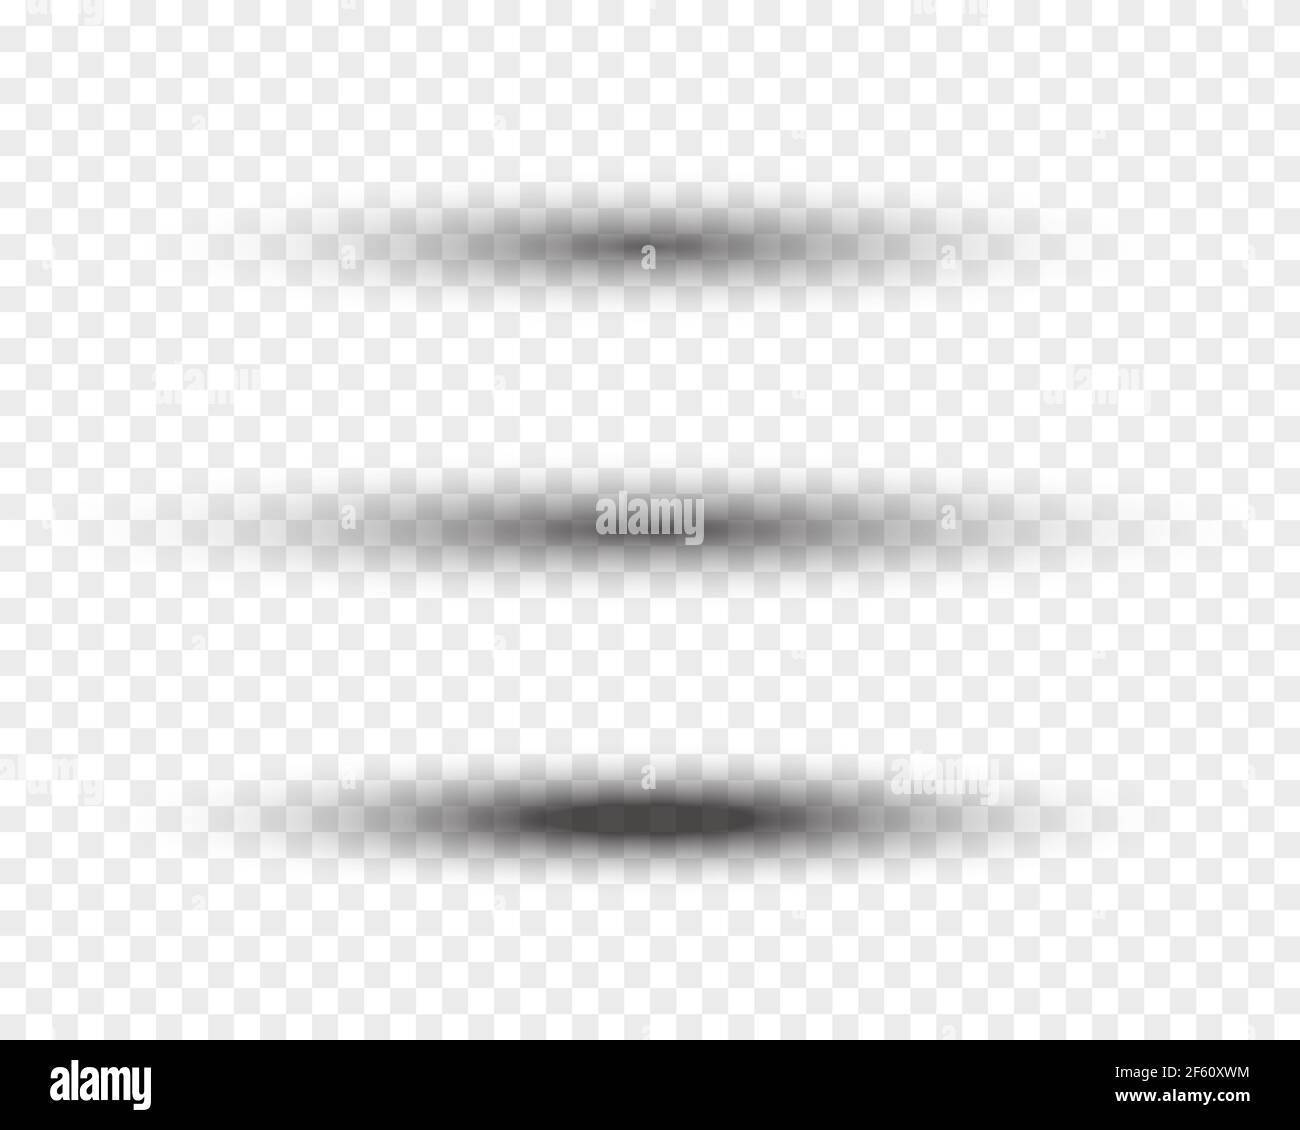 Transparent oval soft shadow set on checkered background Stock Vector